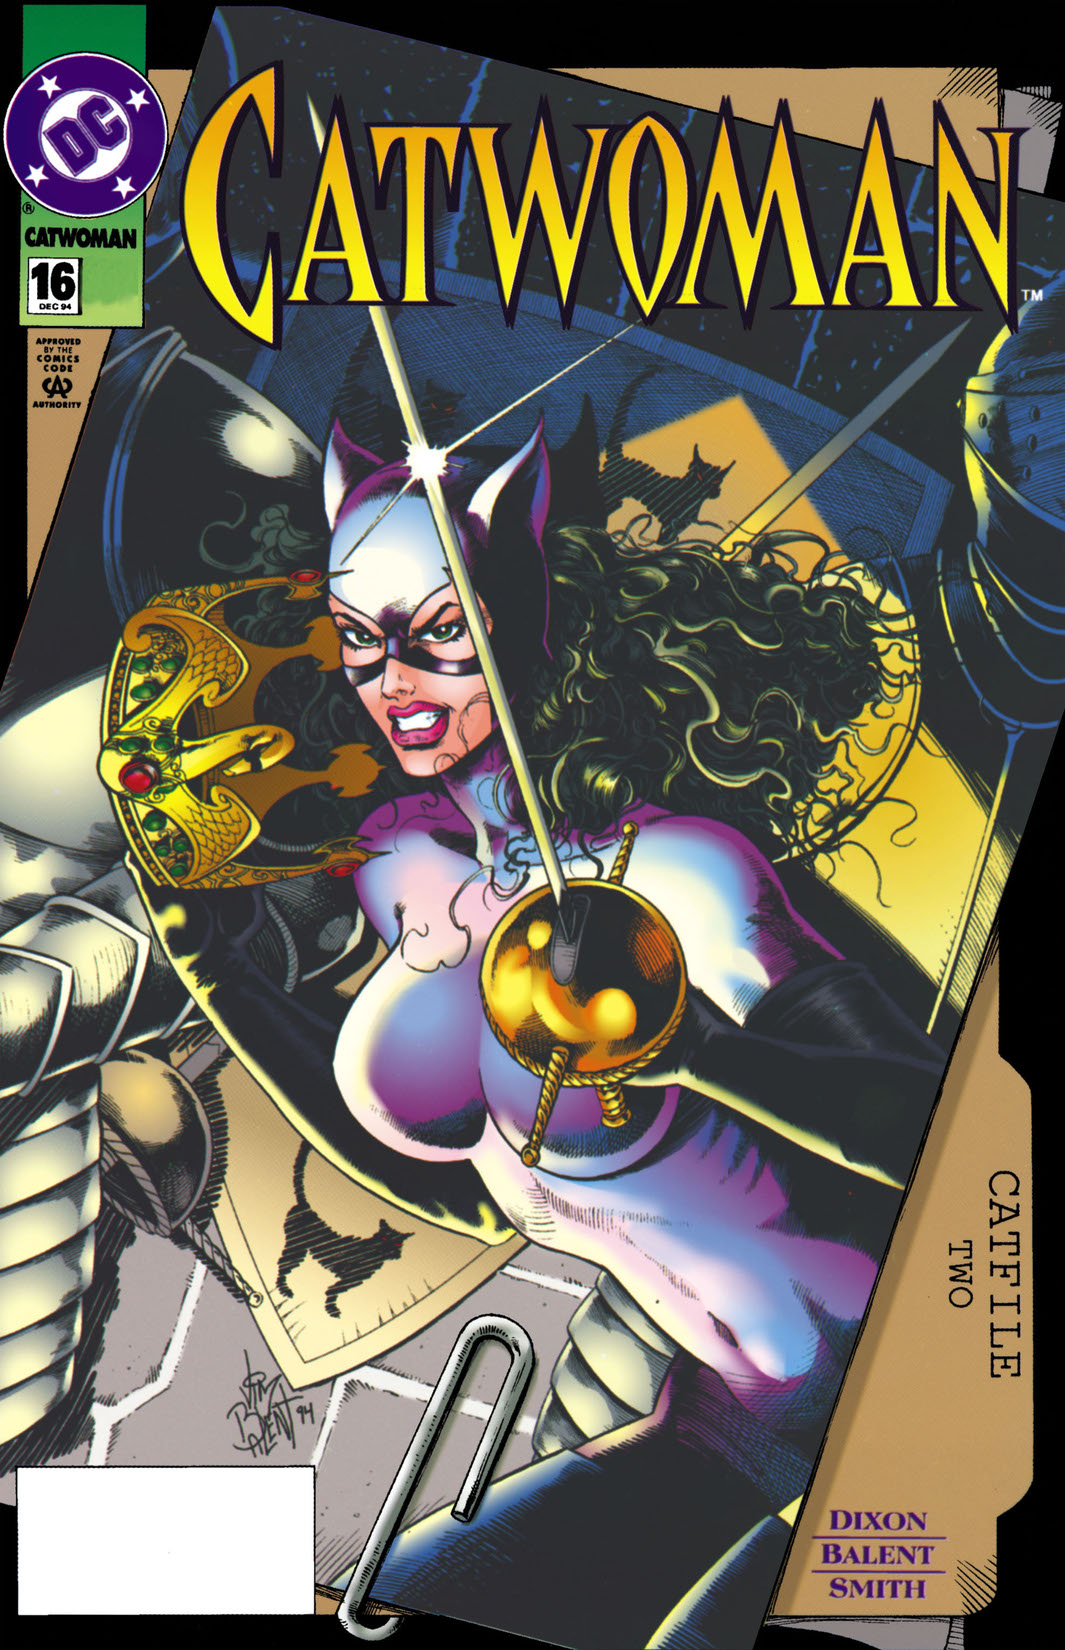 Catwoman (1993-) #16 preview images